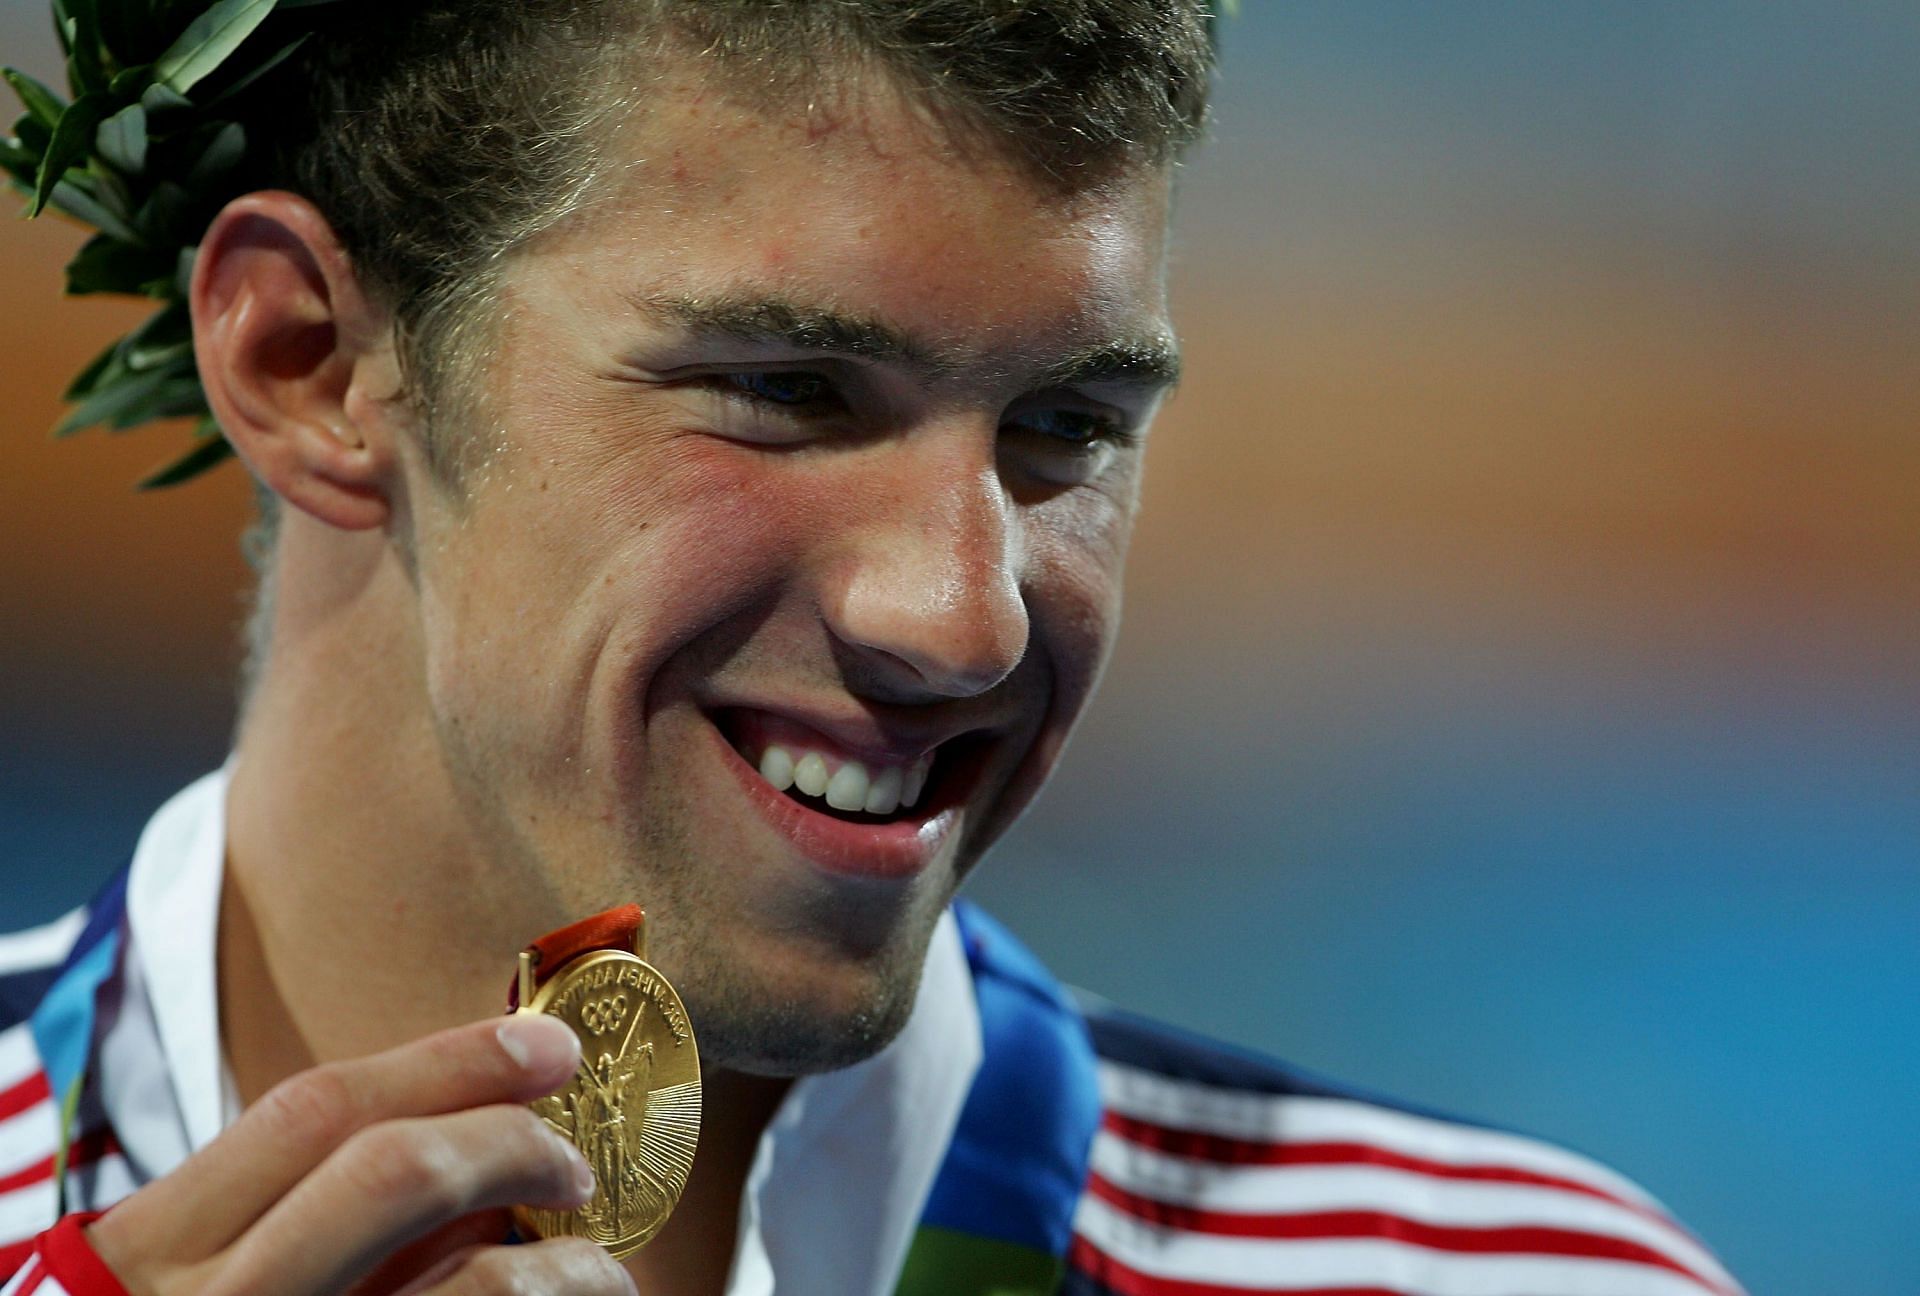 Michael Phelps after winning a gold medal in the Mens 200m Individual Medley at the Medal Ceremony at the 2004 Summer Olympics Games in Athens, Greece